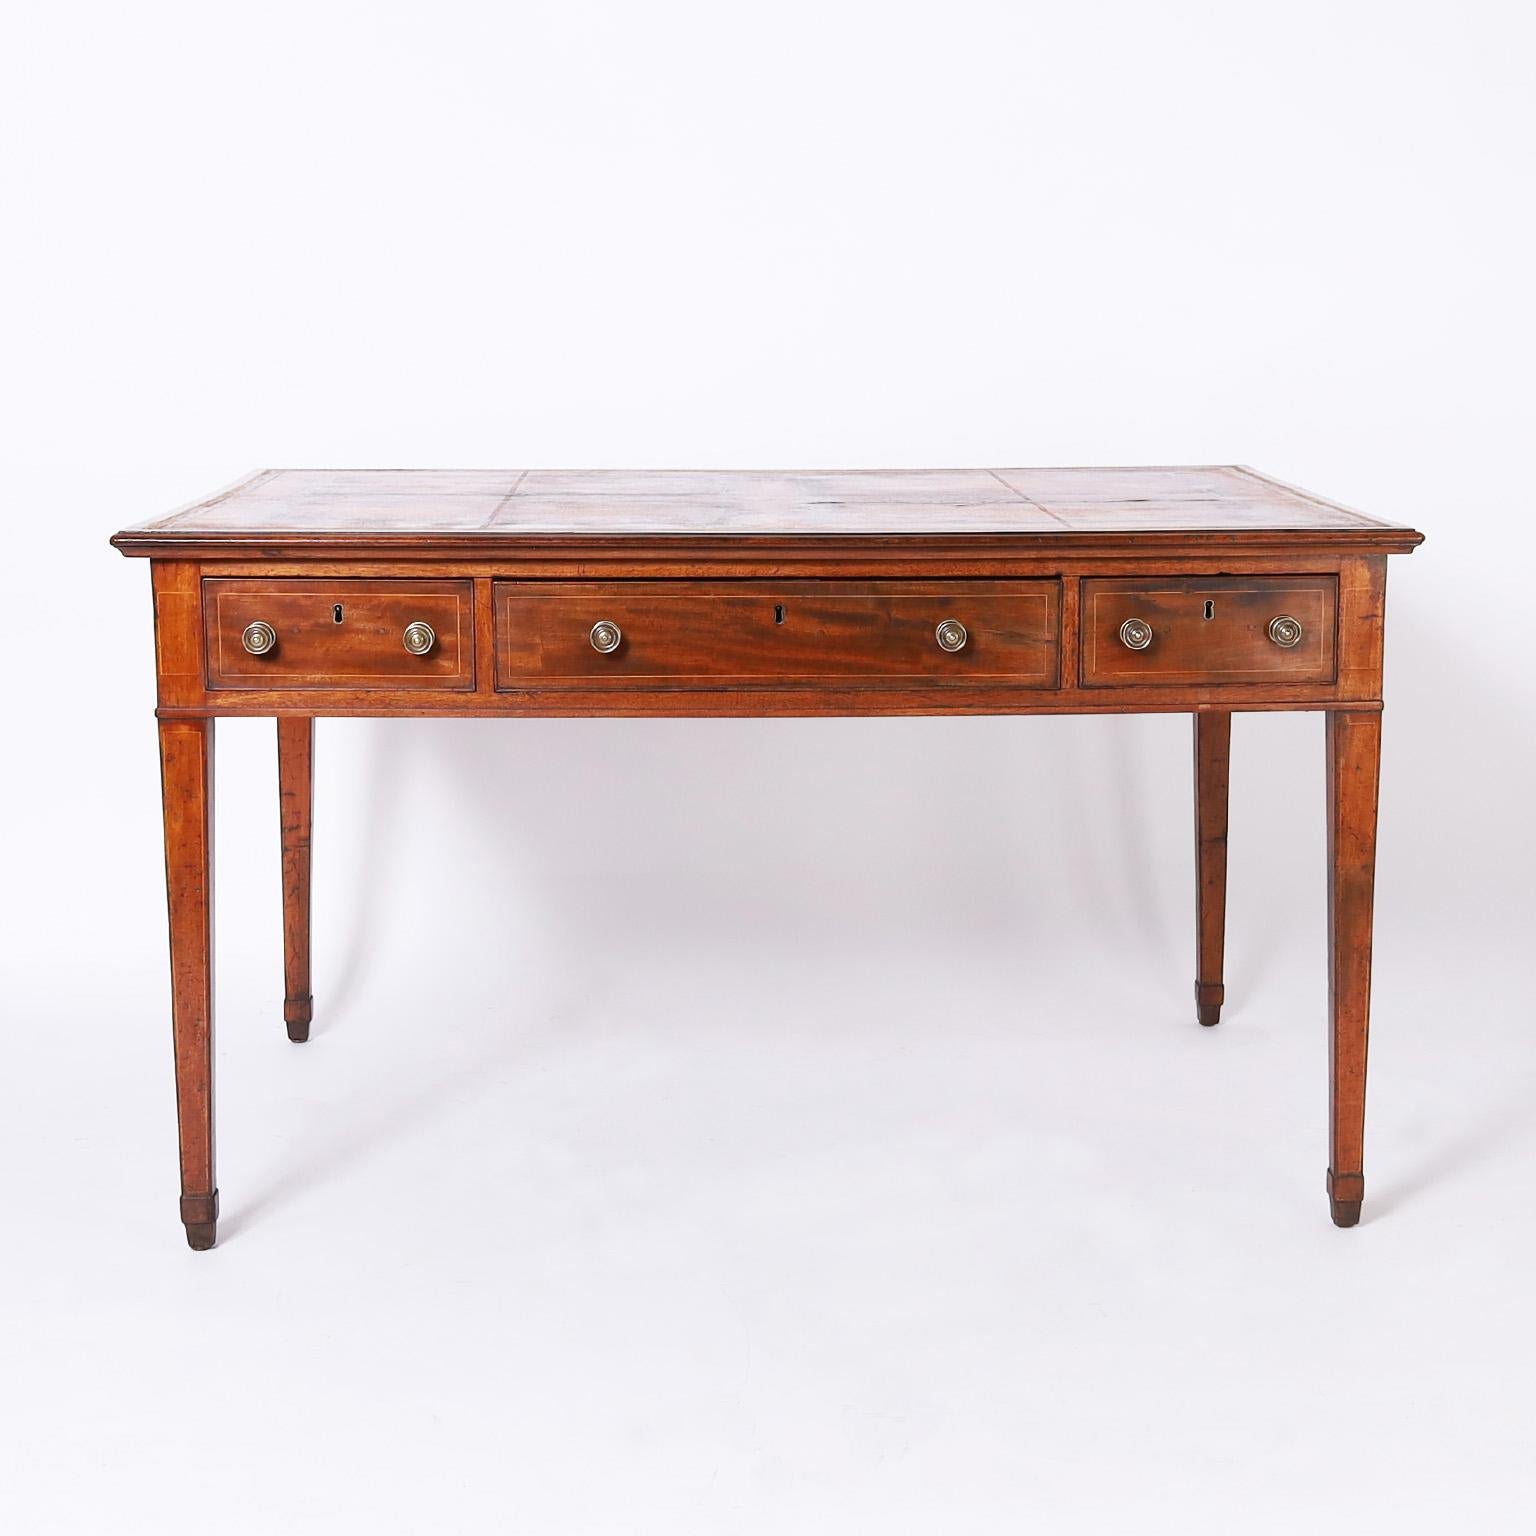 Rare and remarkable early 19th century Hepplewhite partners desk having the original tooled leather top in a crossbanded border, a case with three drawers in each side with beechwood string inlaid highlights and elegant tapered legs on spade feet.